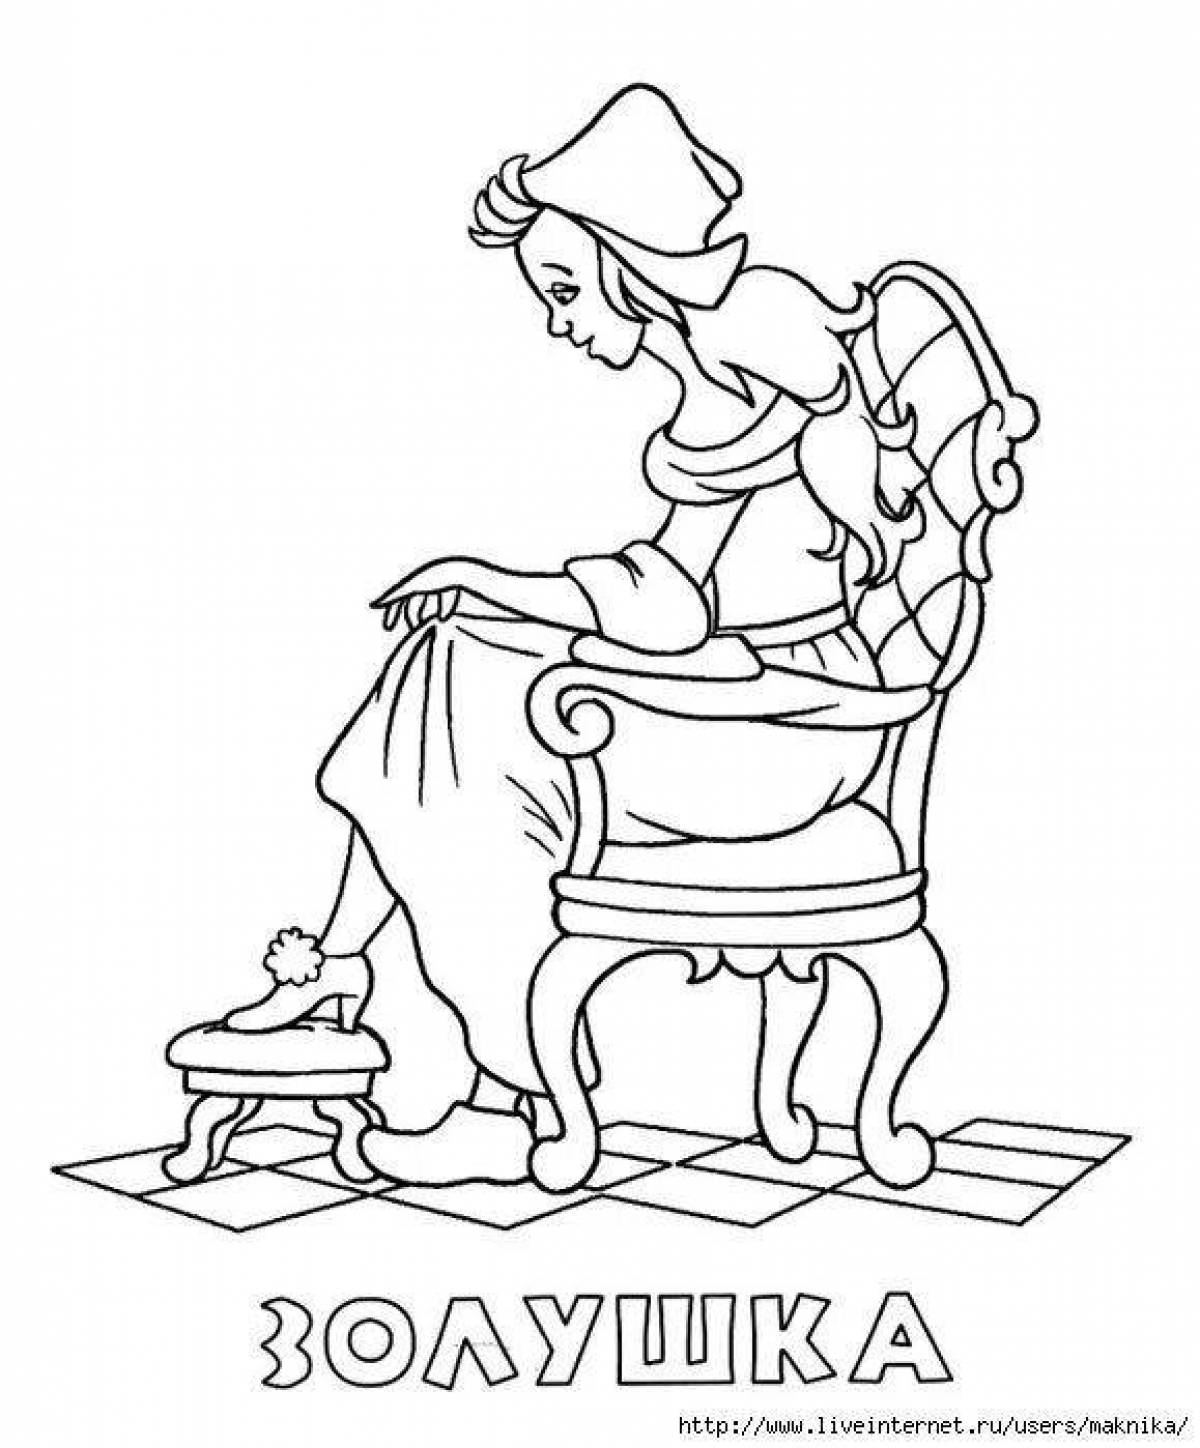 Cinderella and Charles Perrault coloring page